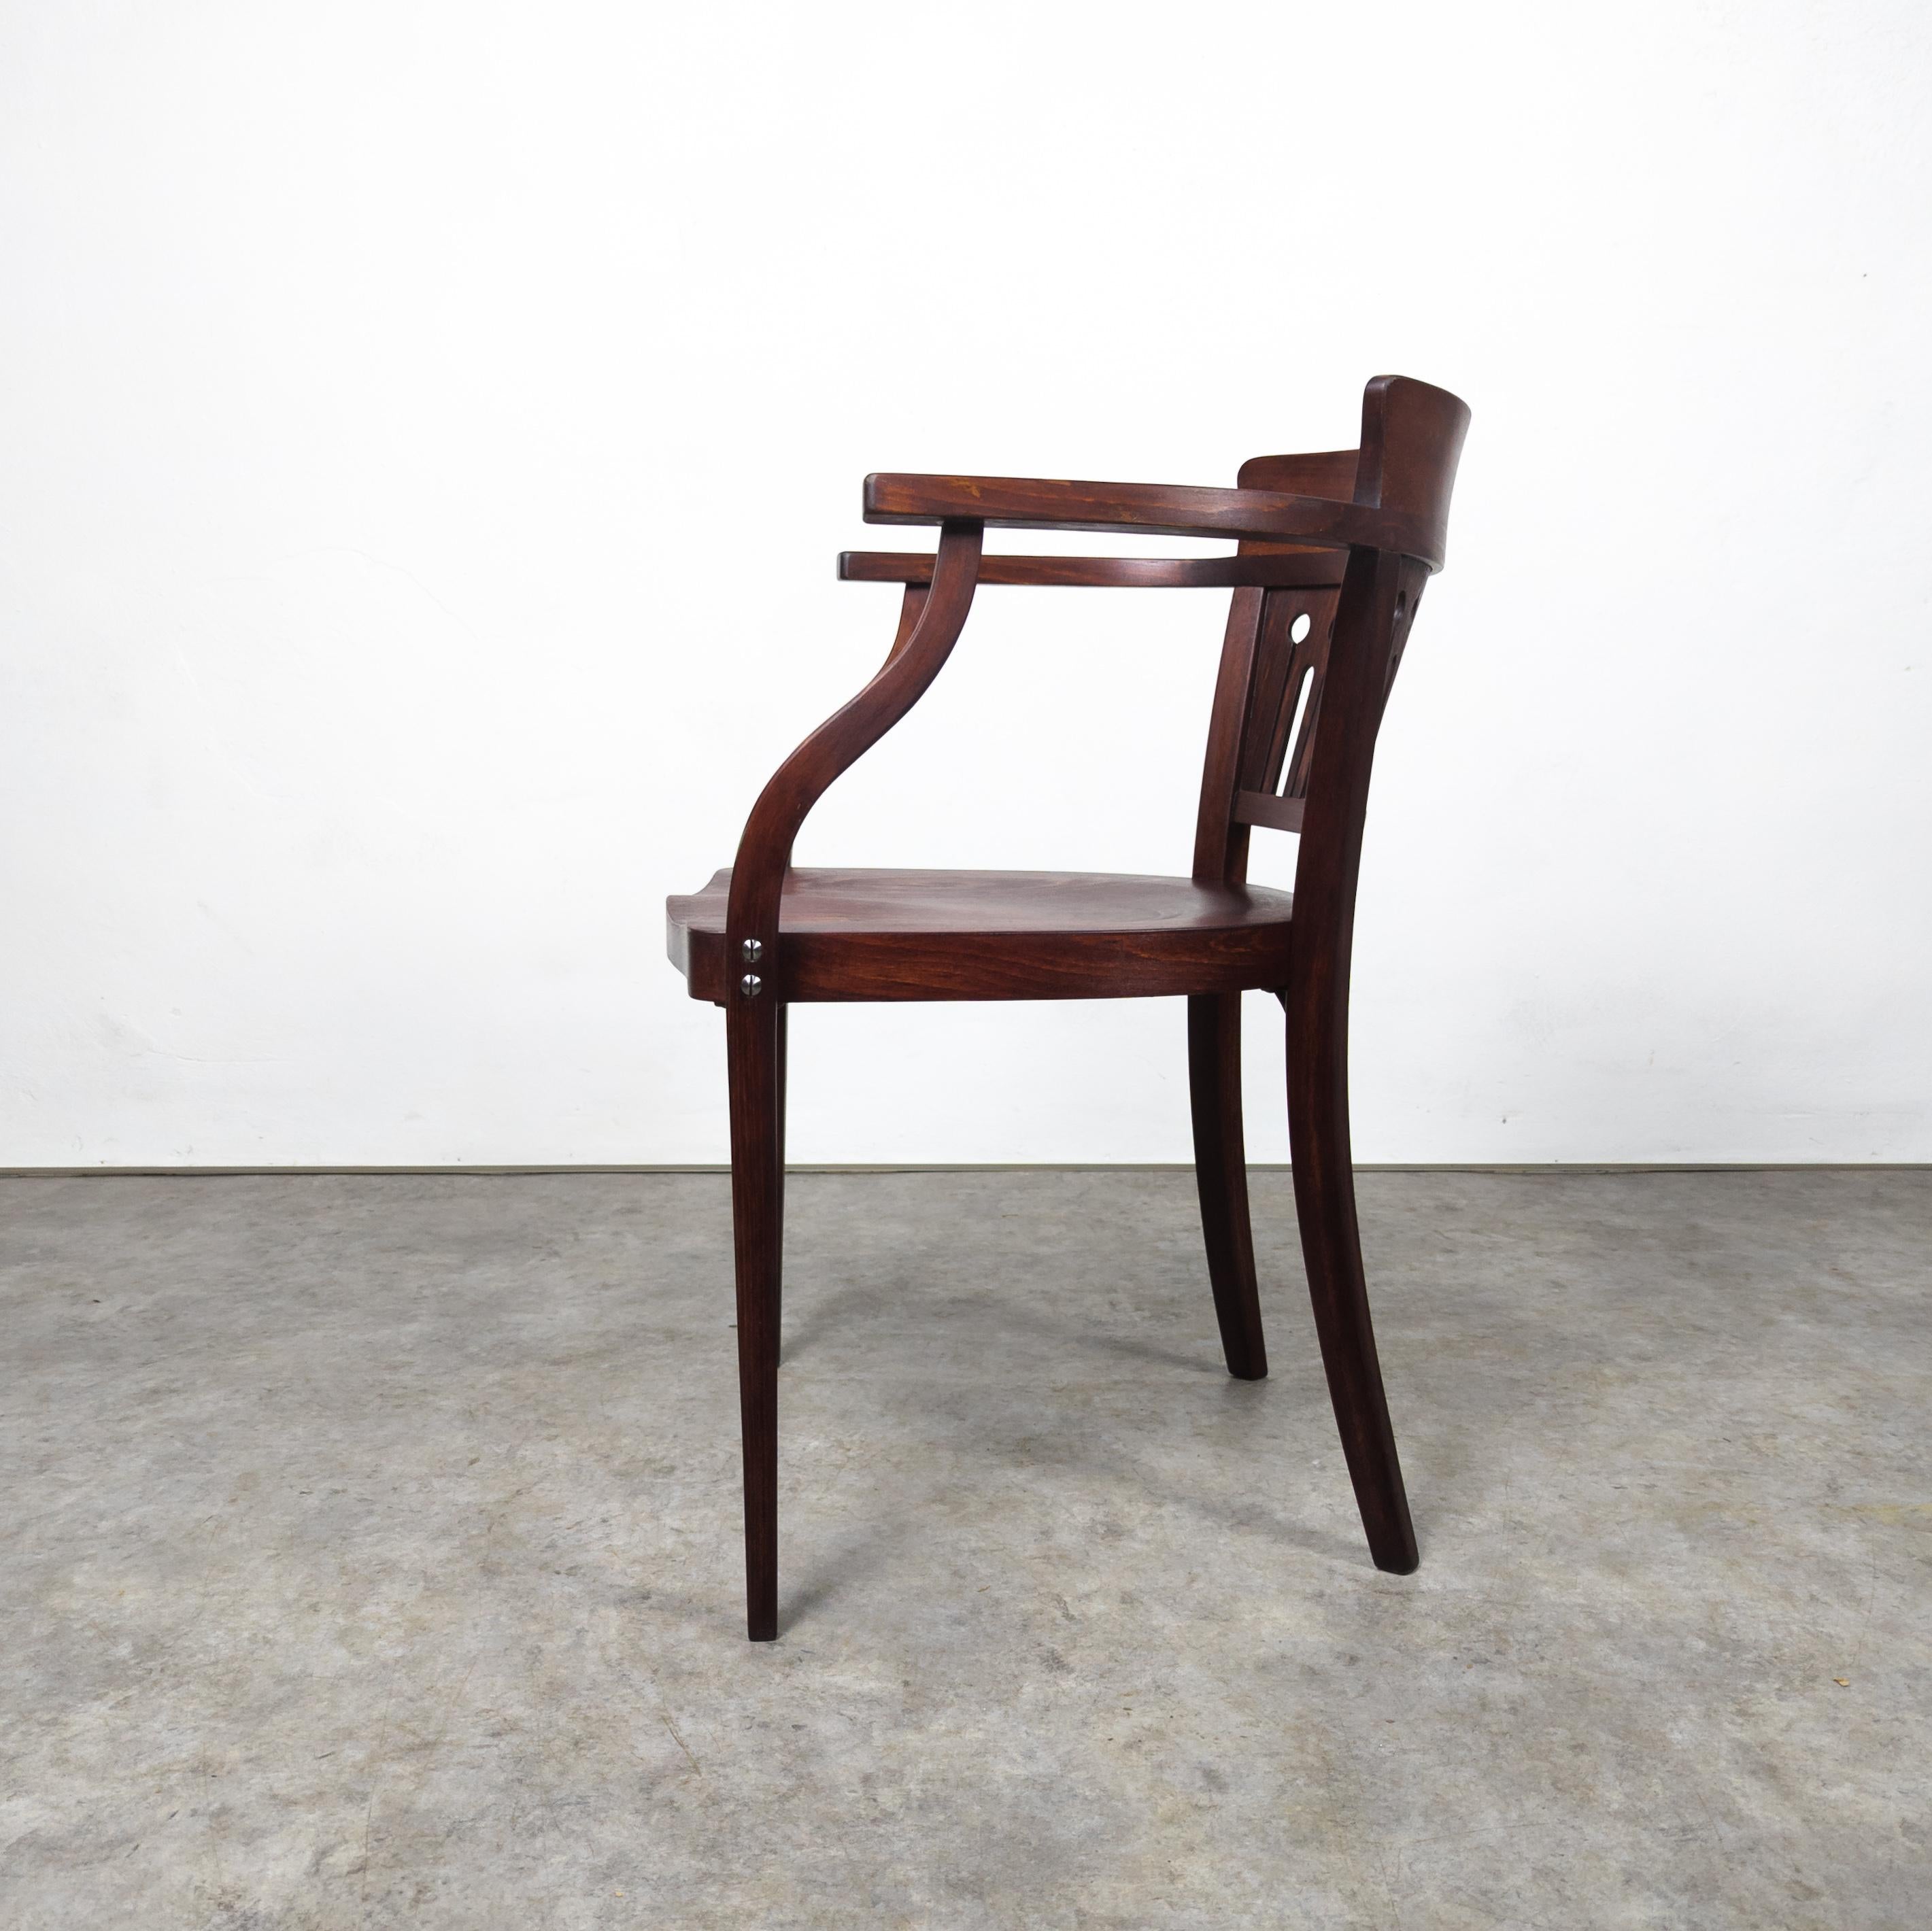 Austrian Thonet No. 6515 armchair by Otto Wagner